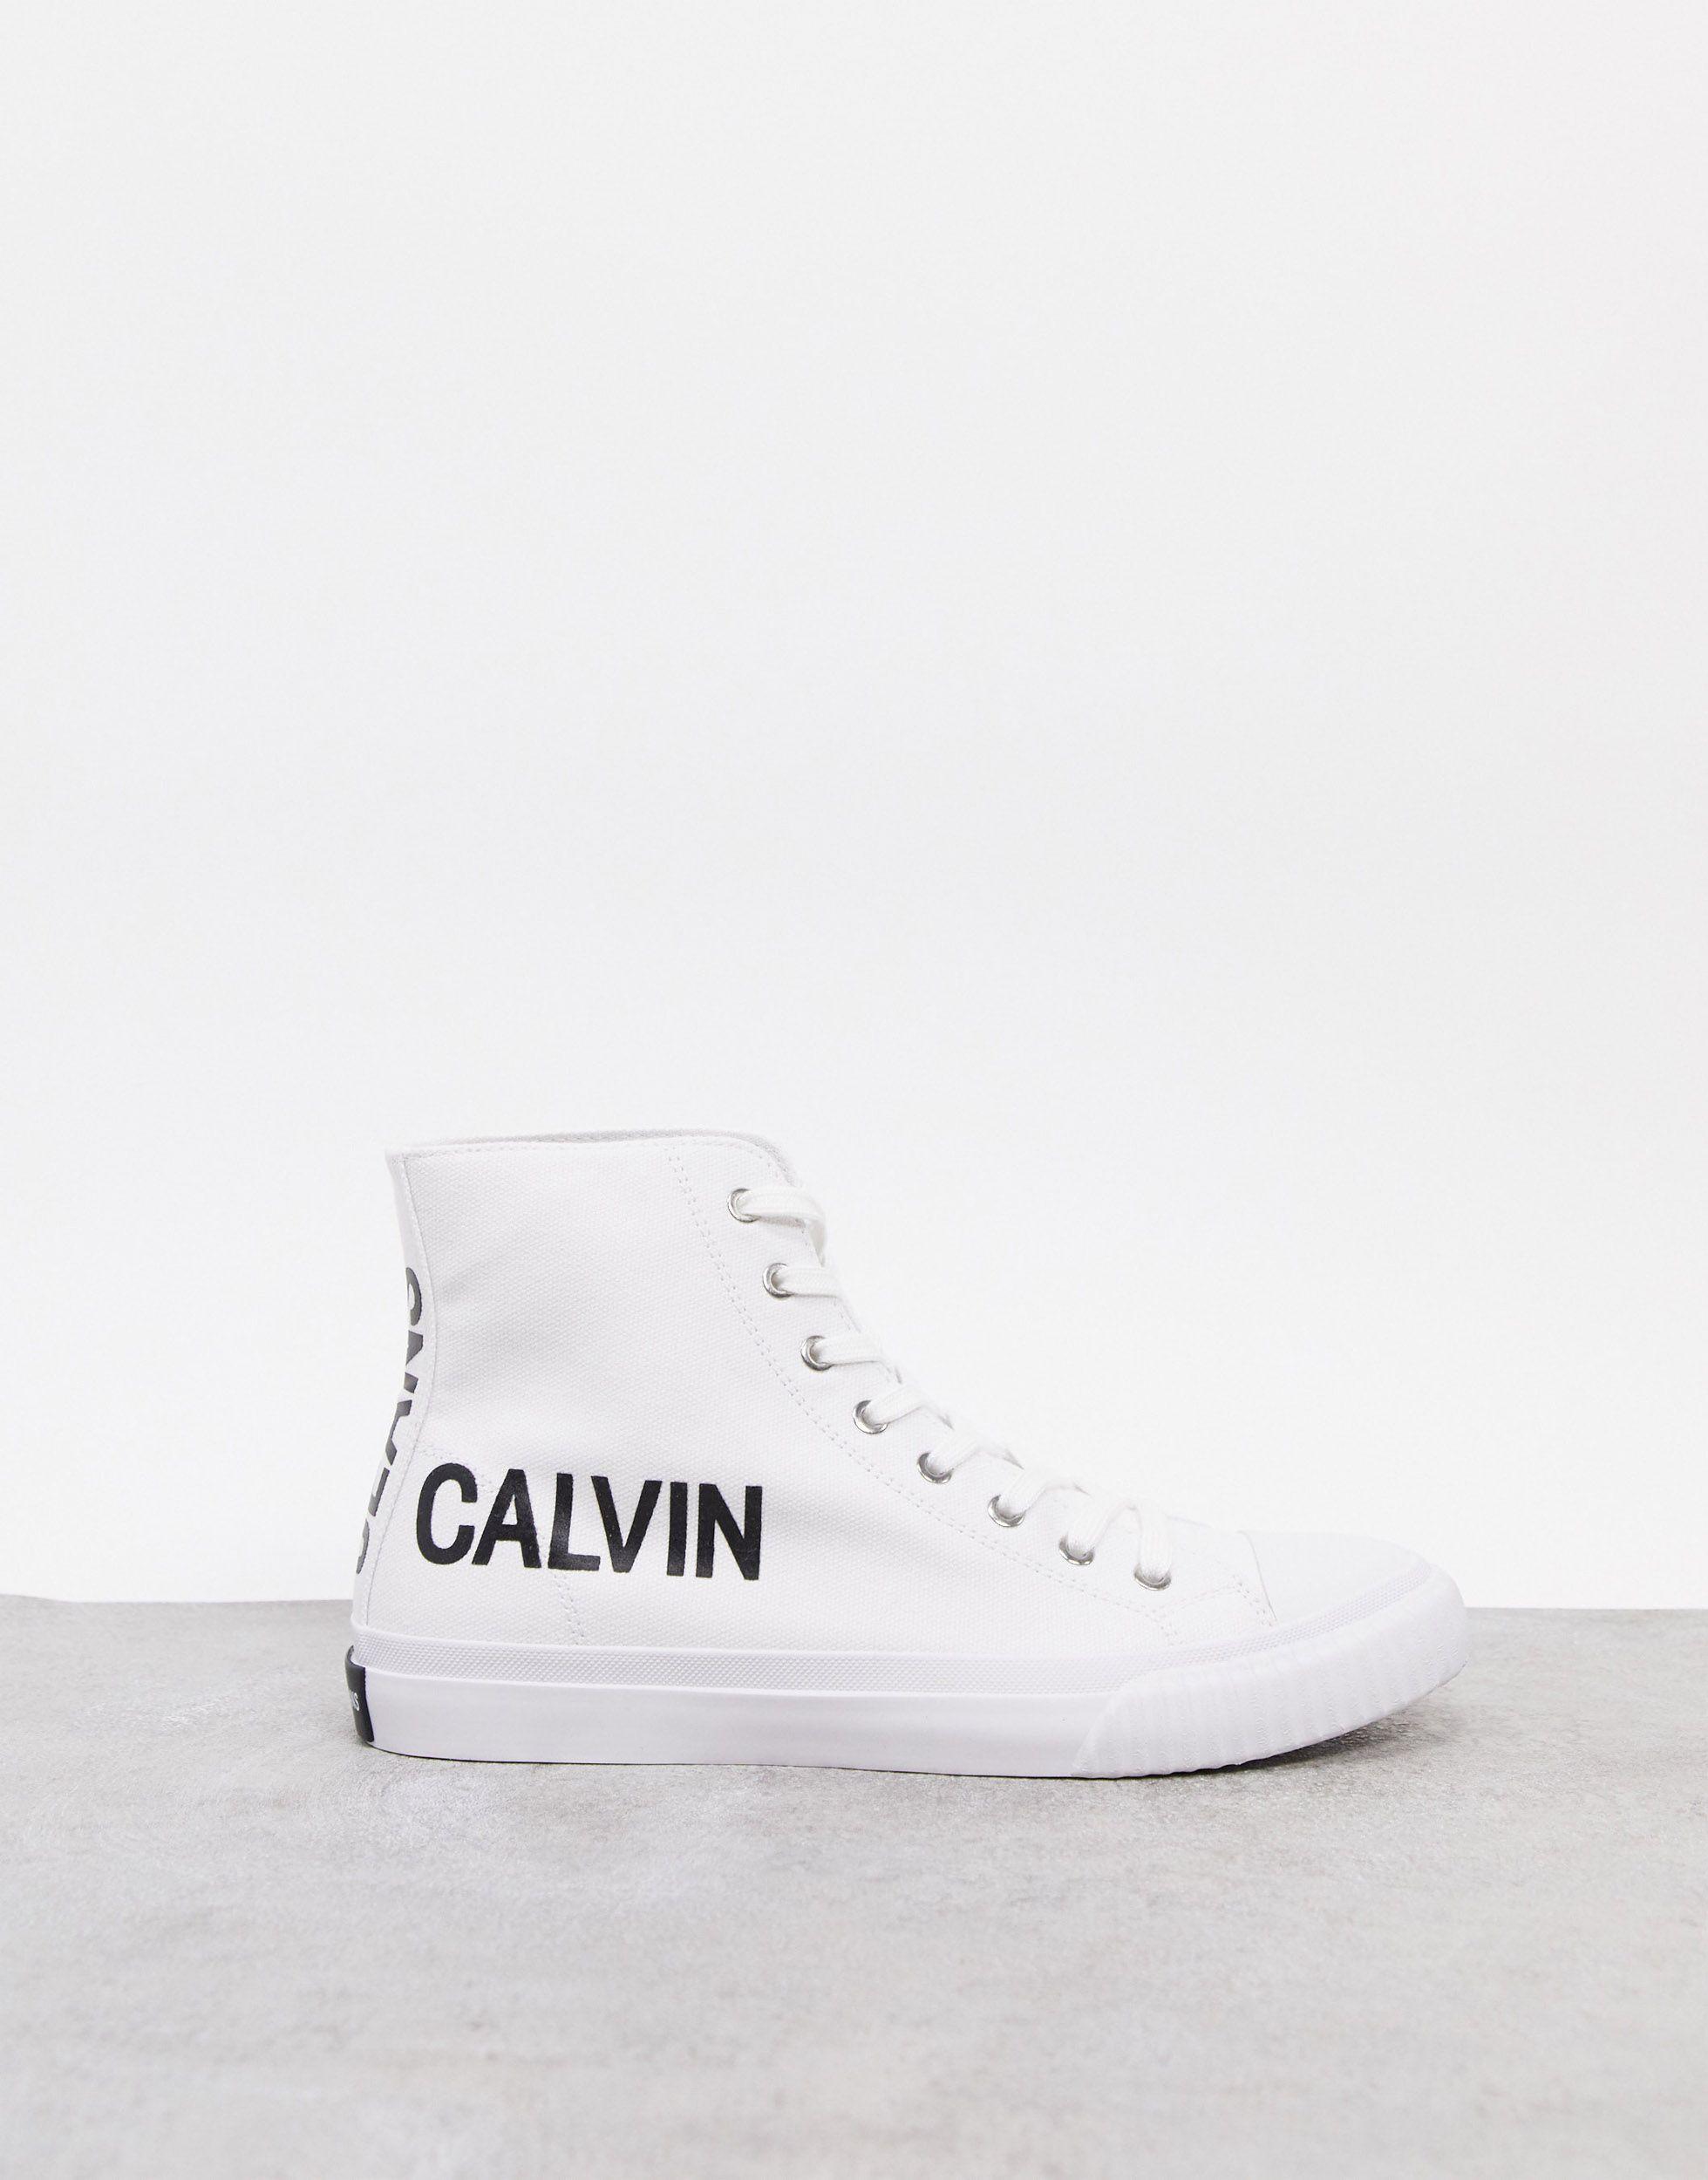 Calvin Klein Jeans Iacopo Canvas High Top Sneakers in White for 